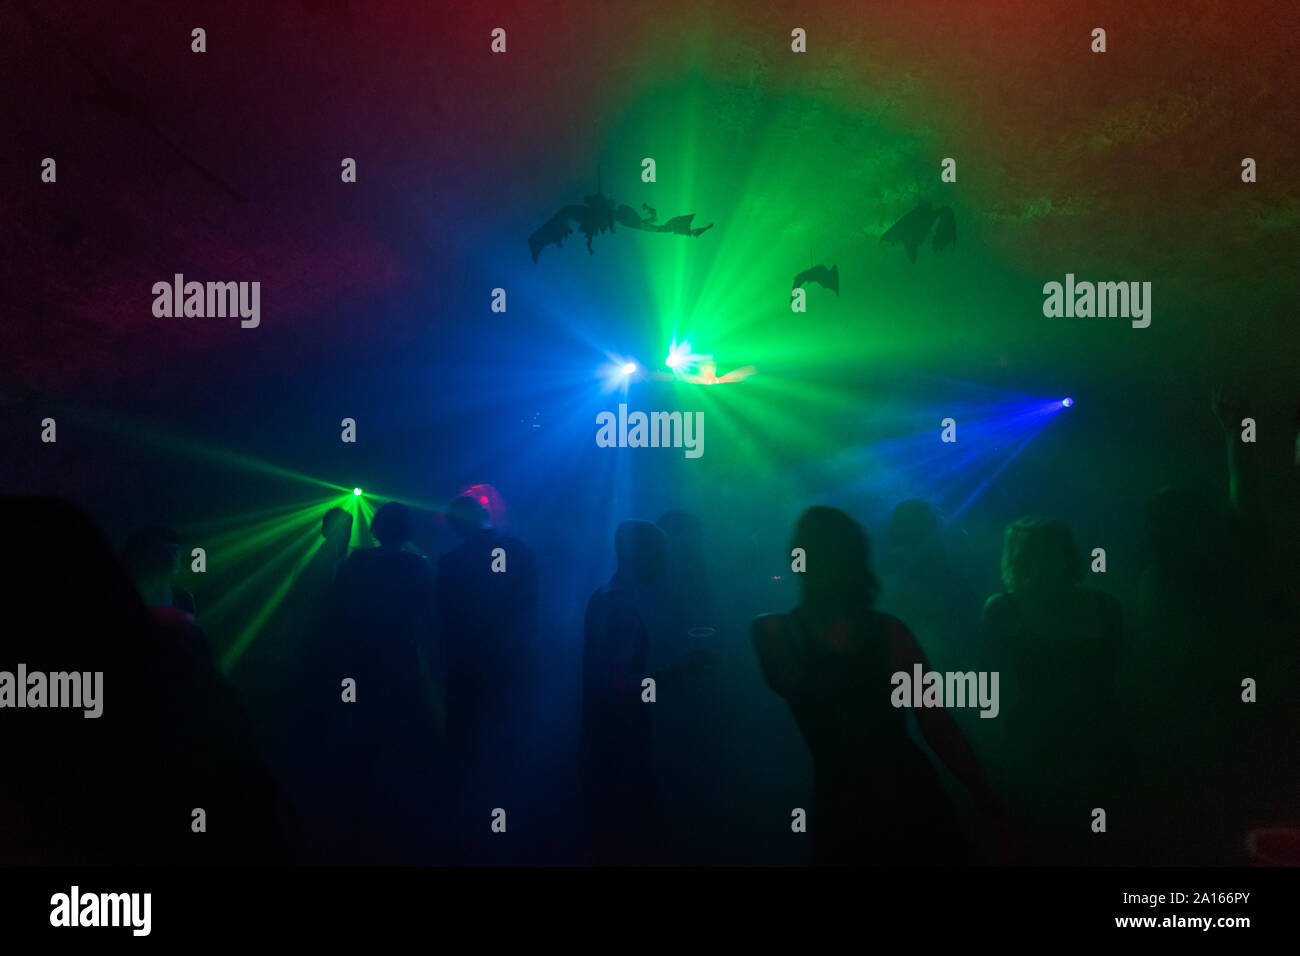 People dancing in a club Stock Photo